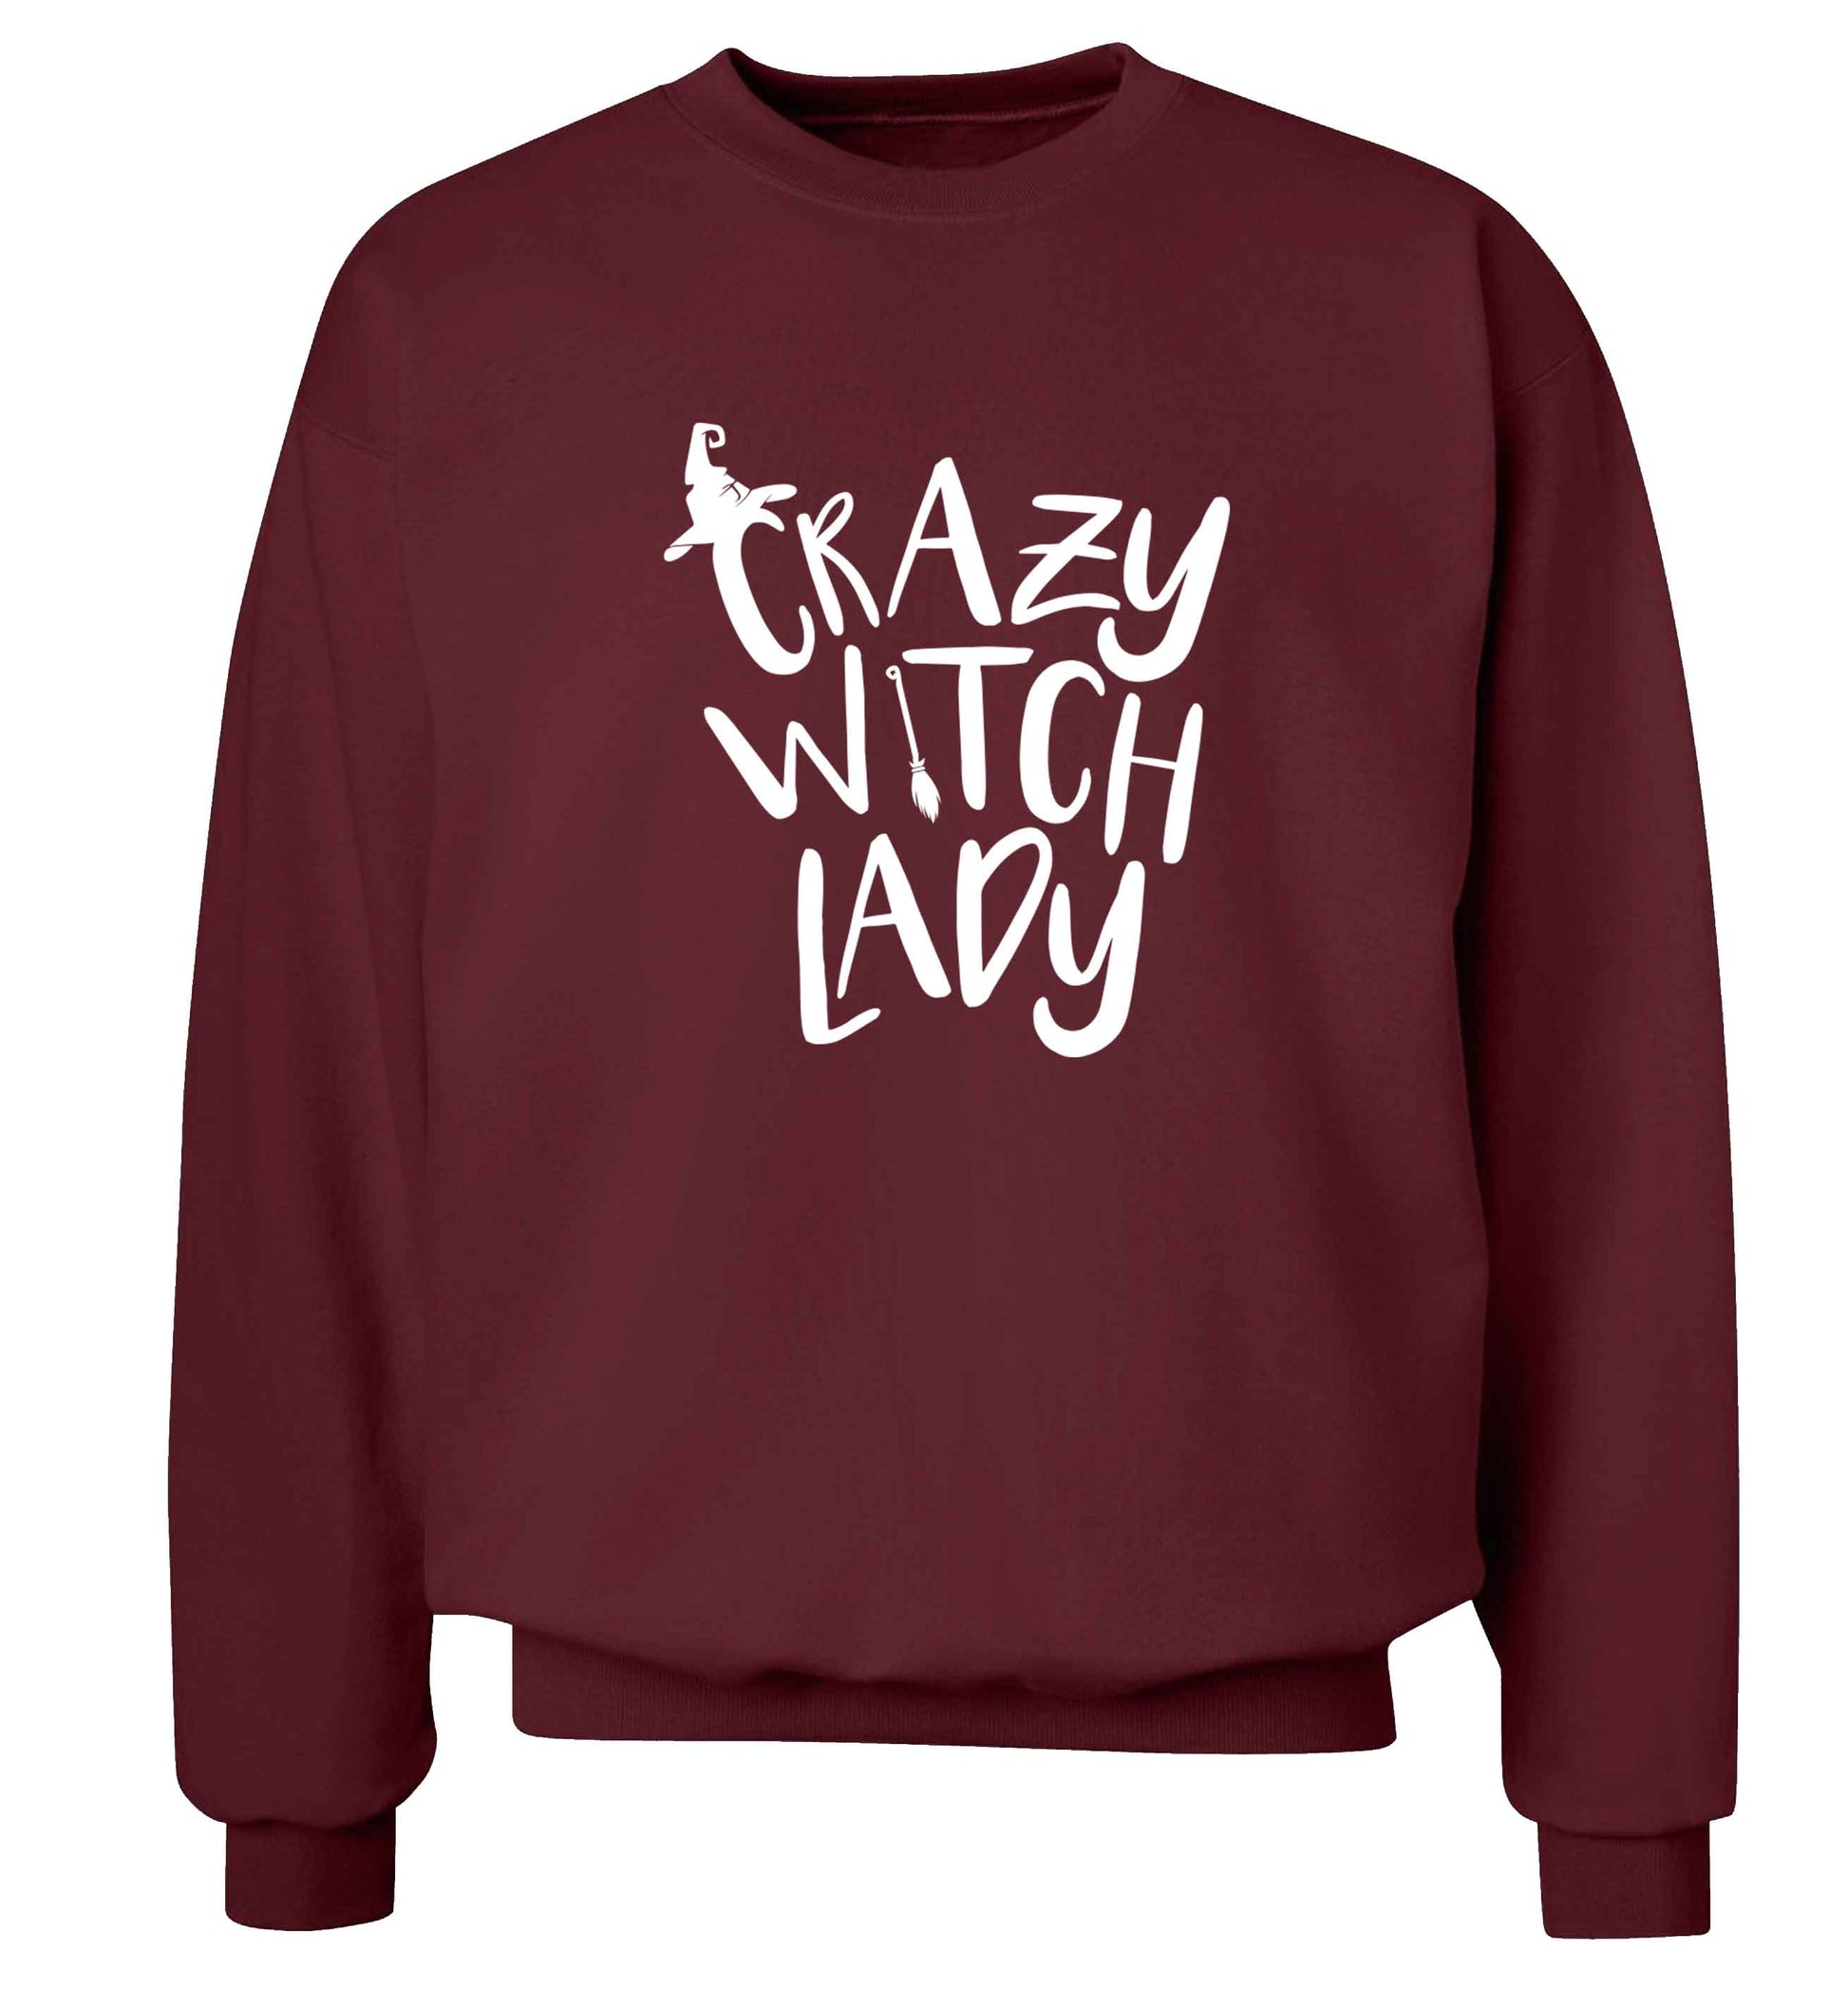 Crazy witch lady adult's unisex maroon sweater 2XL